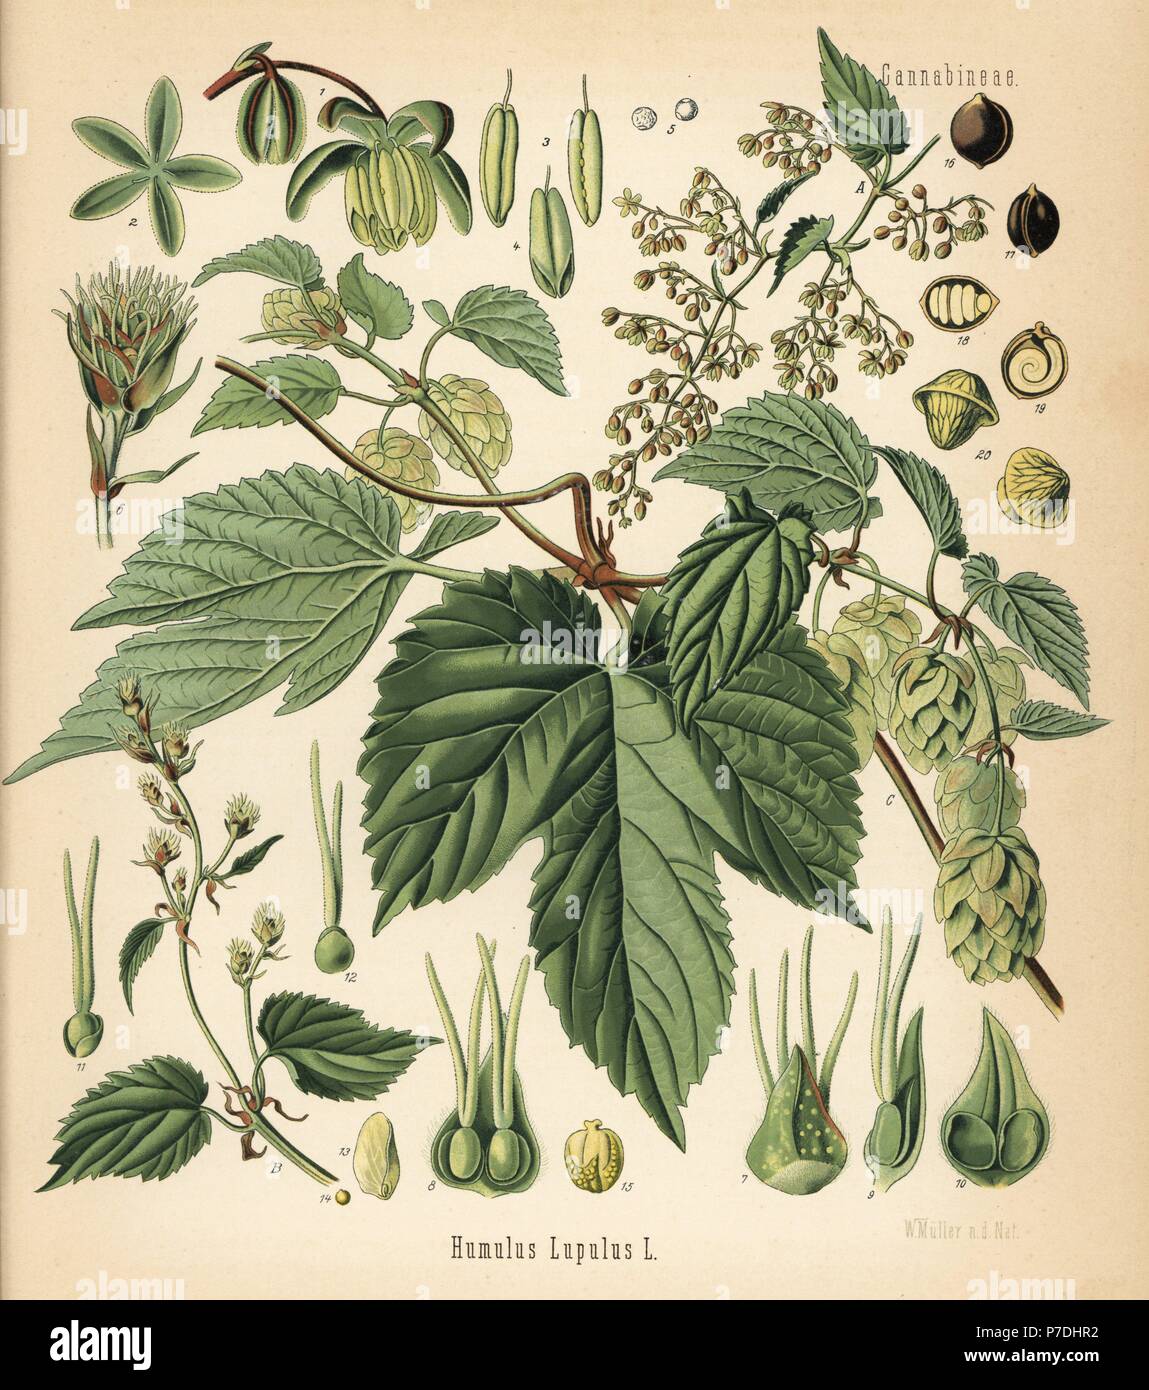 Hops, Humulus lupulus. Chromolithograph after a botanical illustration by Walther Muller from Hermann Adolph Koehler's Medicinal Plants, edited by Gustav Pabst, Koehler, Germany, 1887. Stock Photo